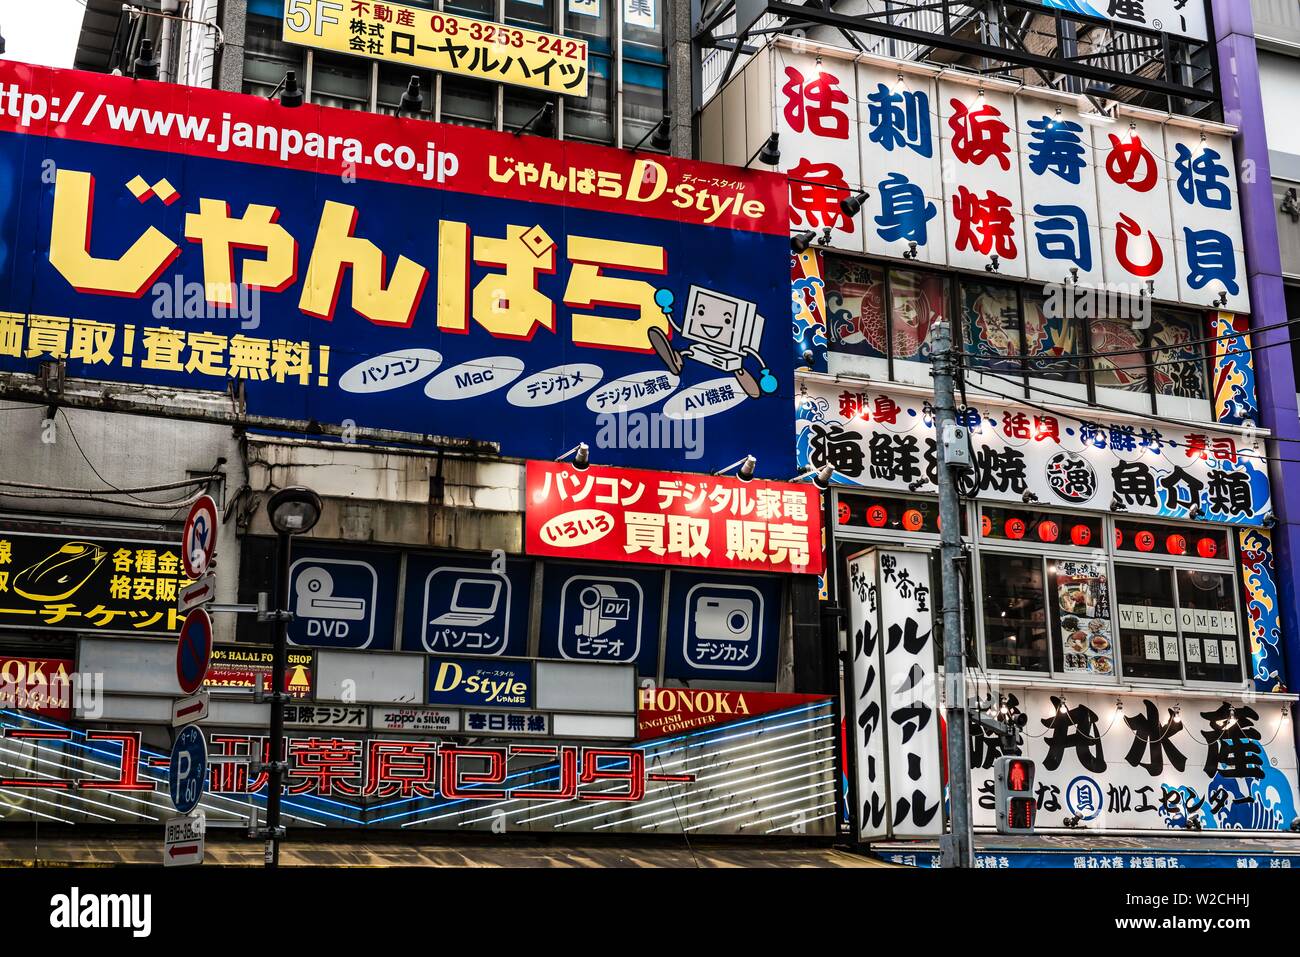 Facade of an electronics store with advertising, Japanese characters, Akihabara, Electric City, electronics mile, shopping center, Tokyo, Japan Stock Photo